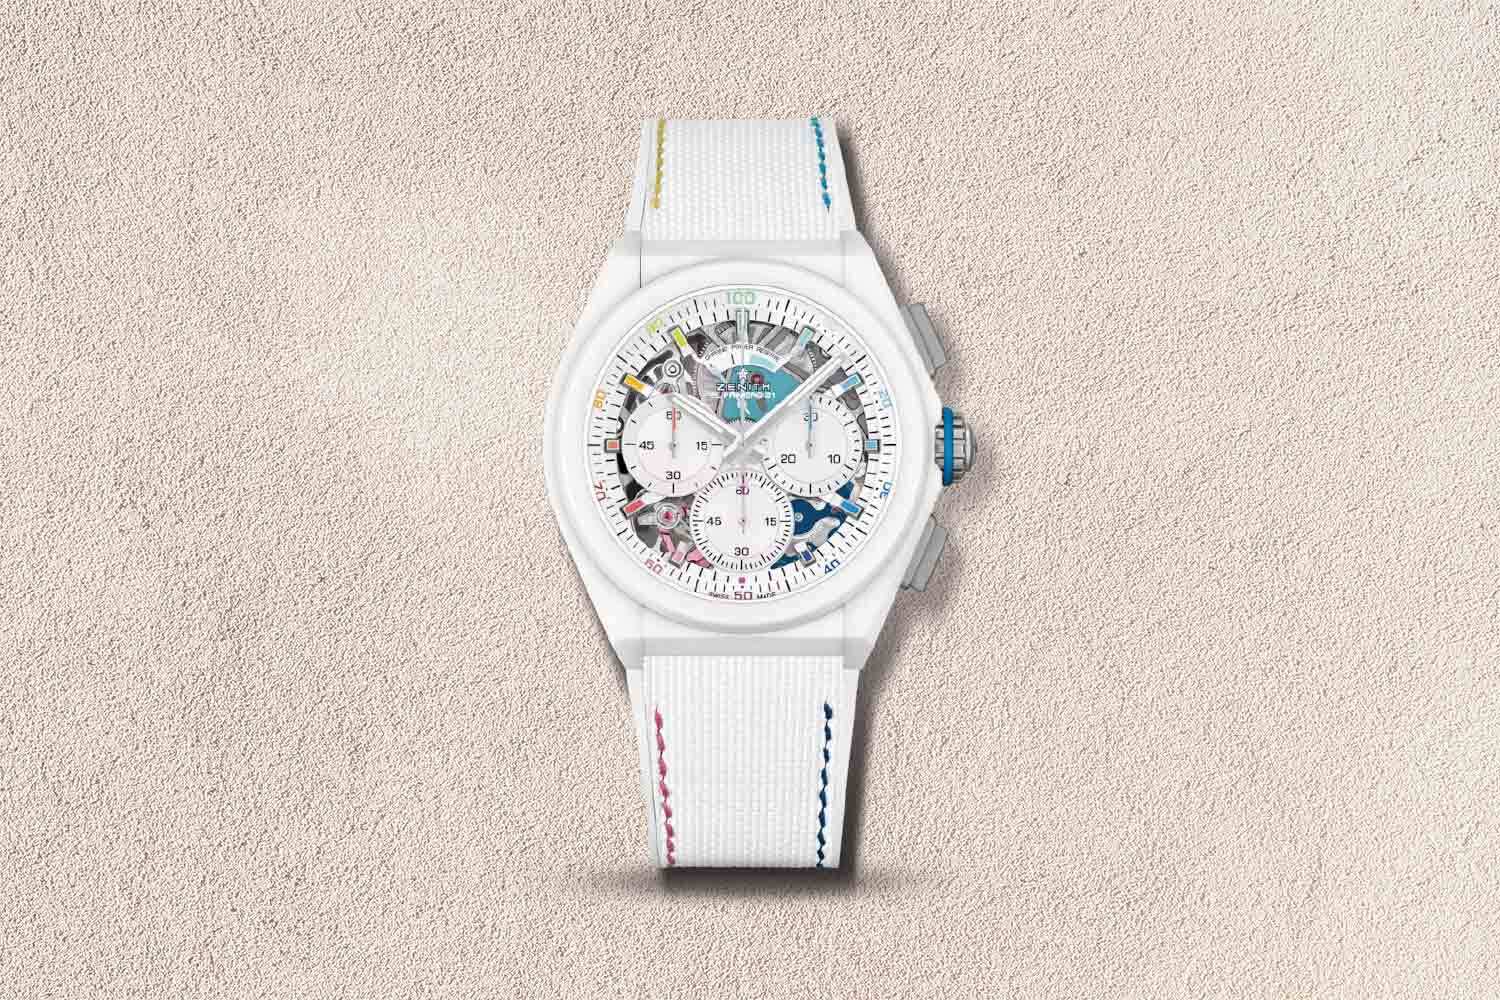 Fully white watch with rainbow accented colors